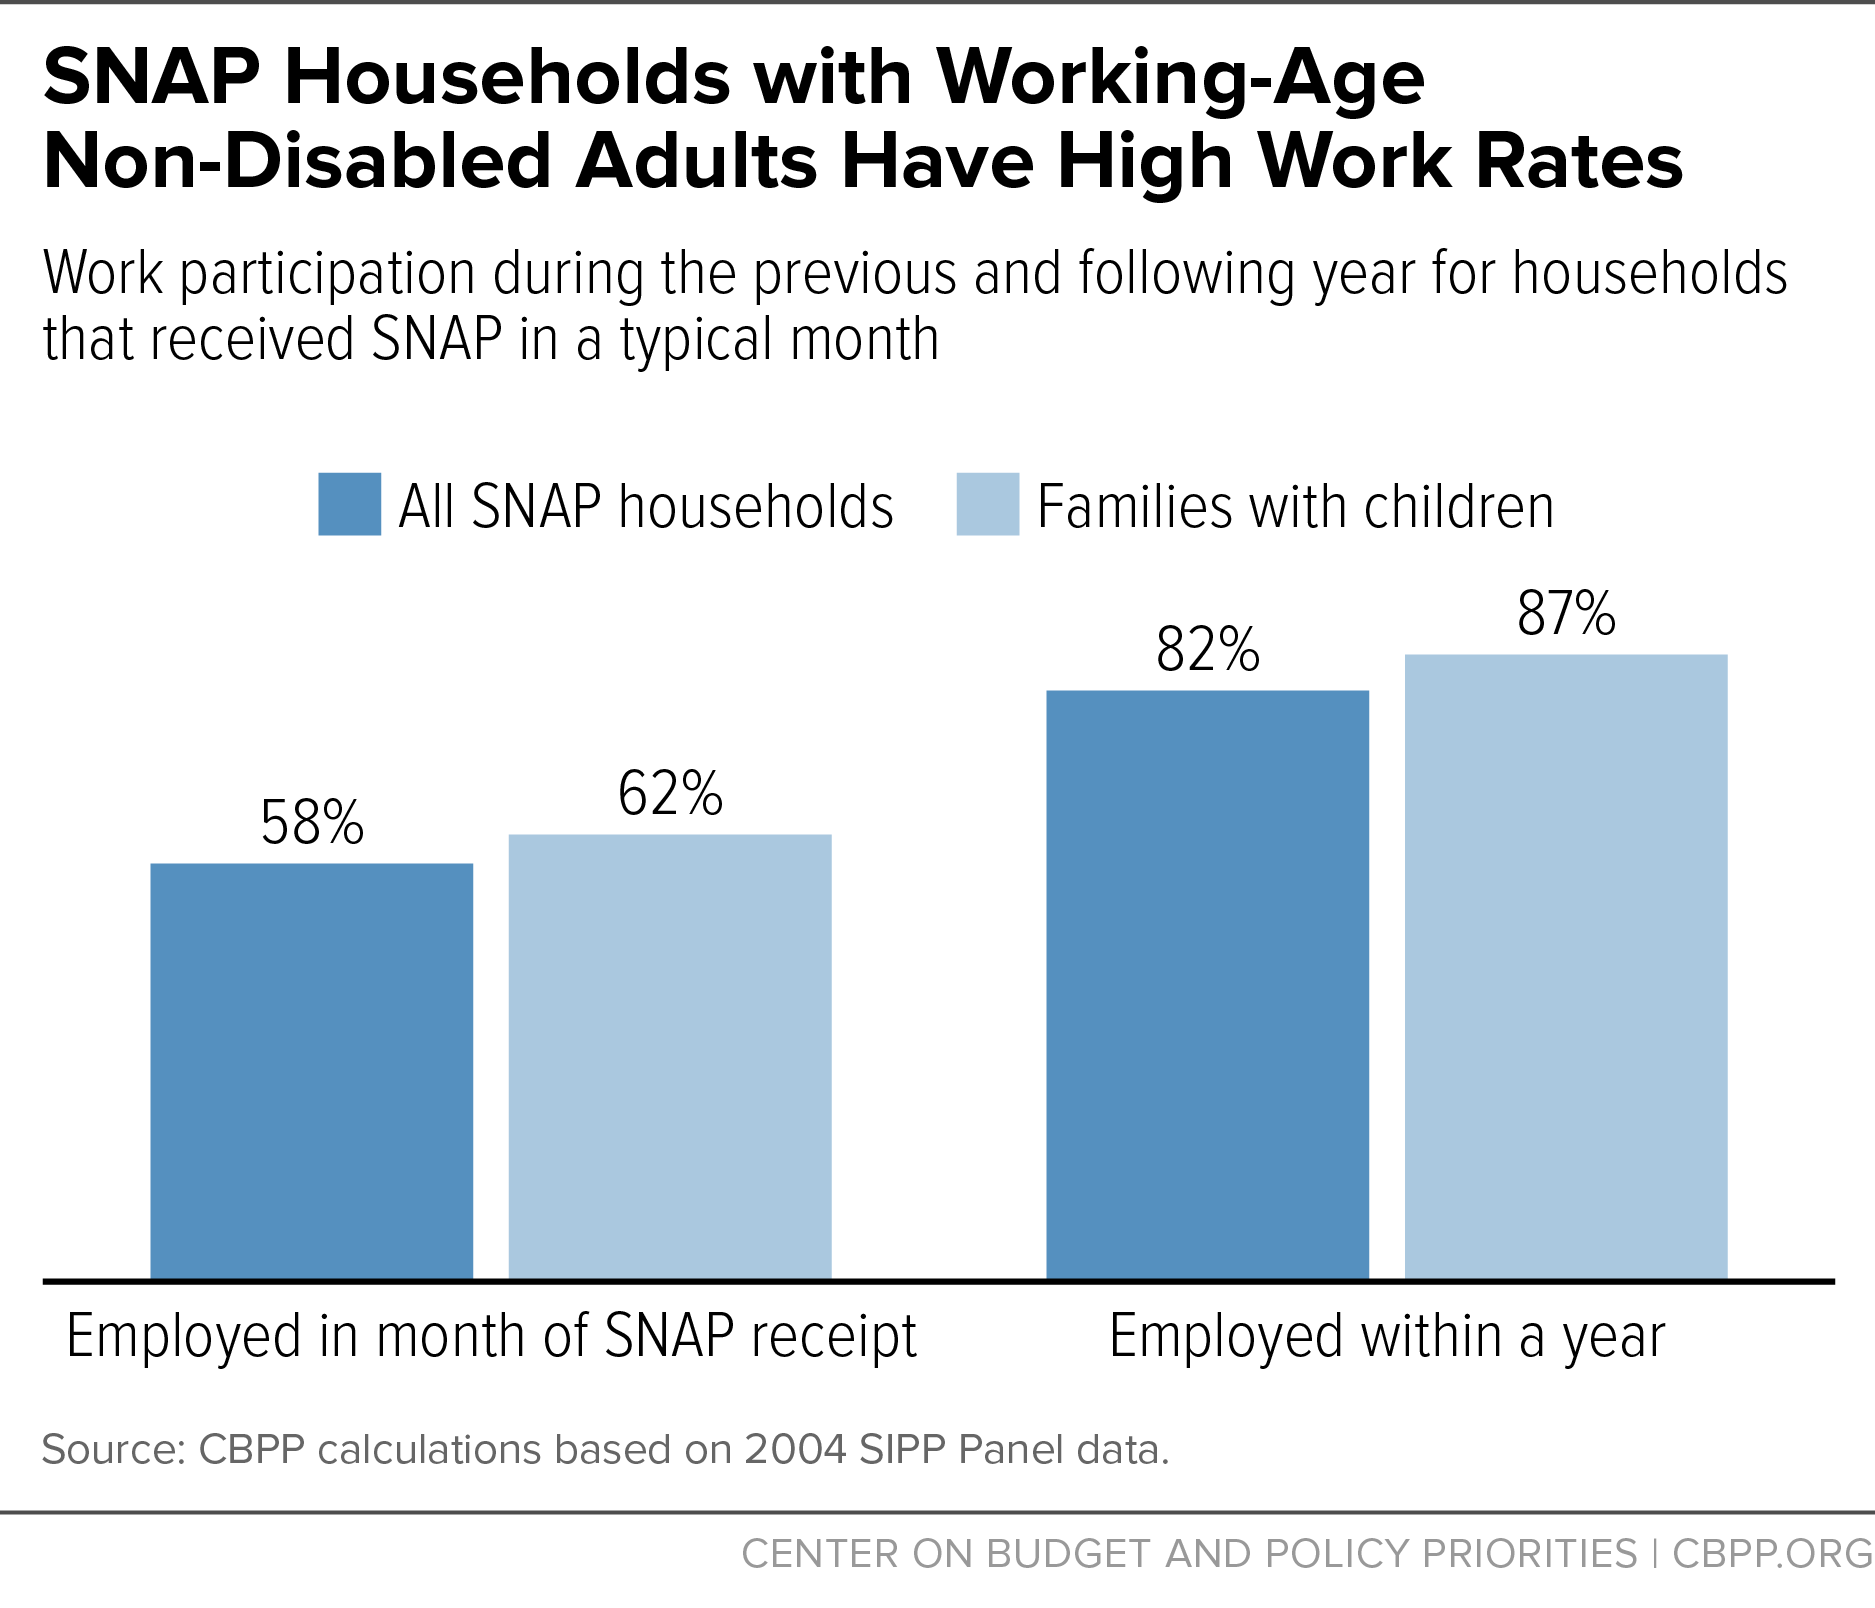 SNAP Households with Working-Age Non-Disabled Adults Have High Work Rates